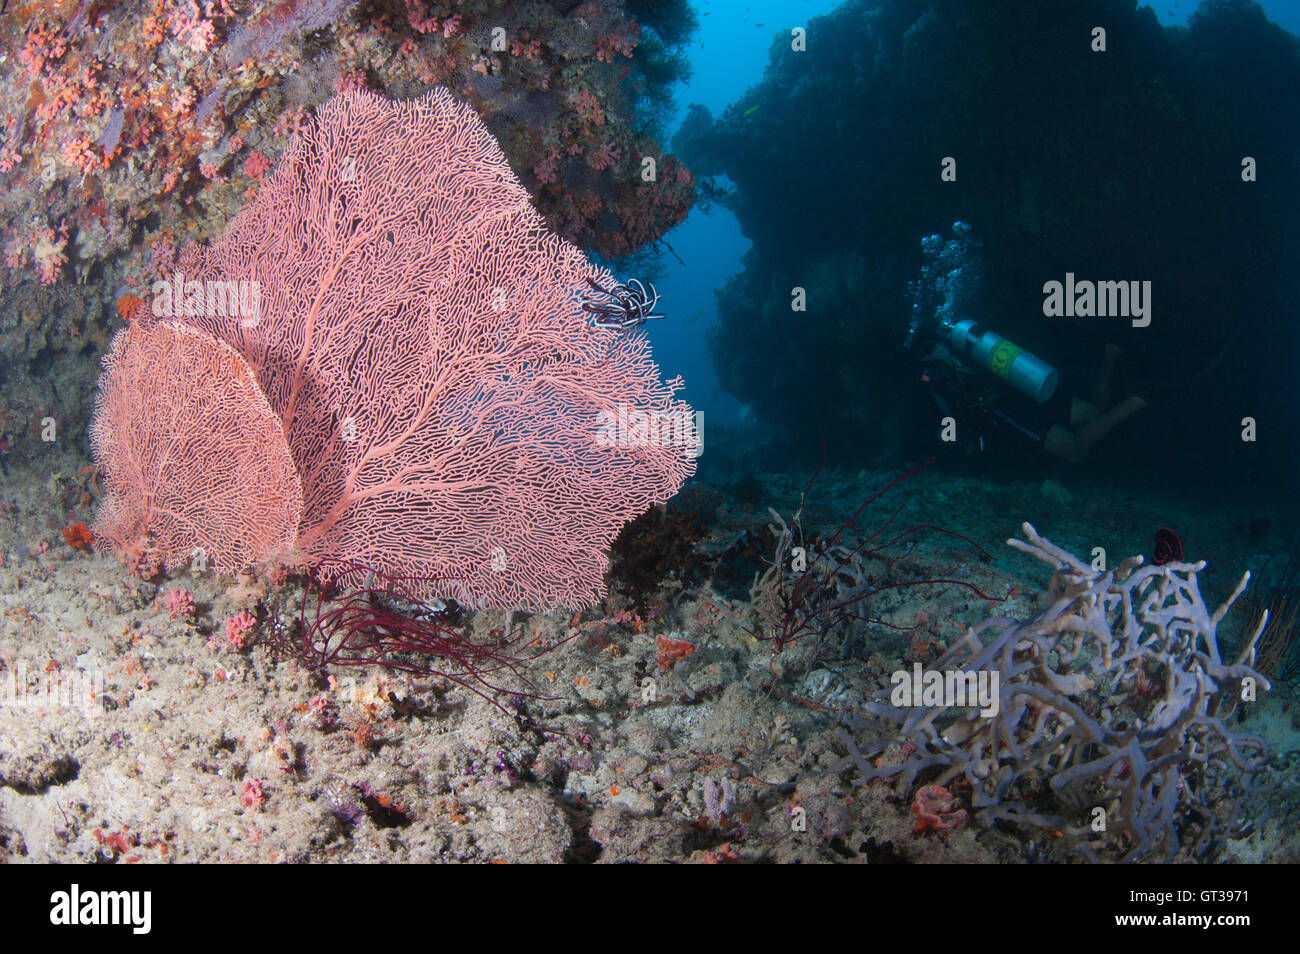 Large gorgonia fan coral on the mouth of an underwater pass in Kuda Rah Thila, Ari Atoll, Maldives Stock Photo